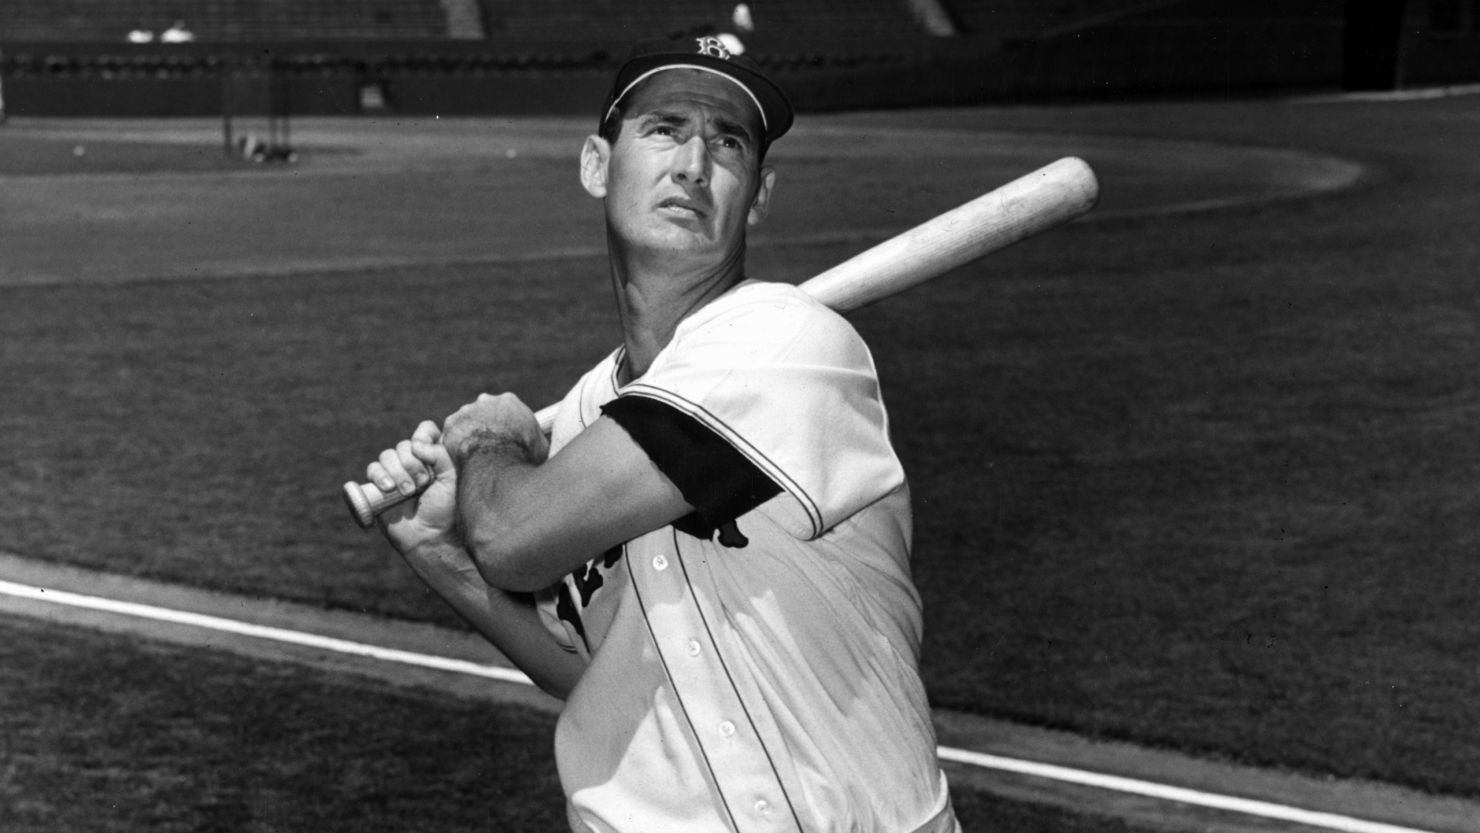 Ted Williams swings the bat in a photo taken circa 1955.